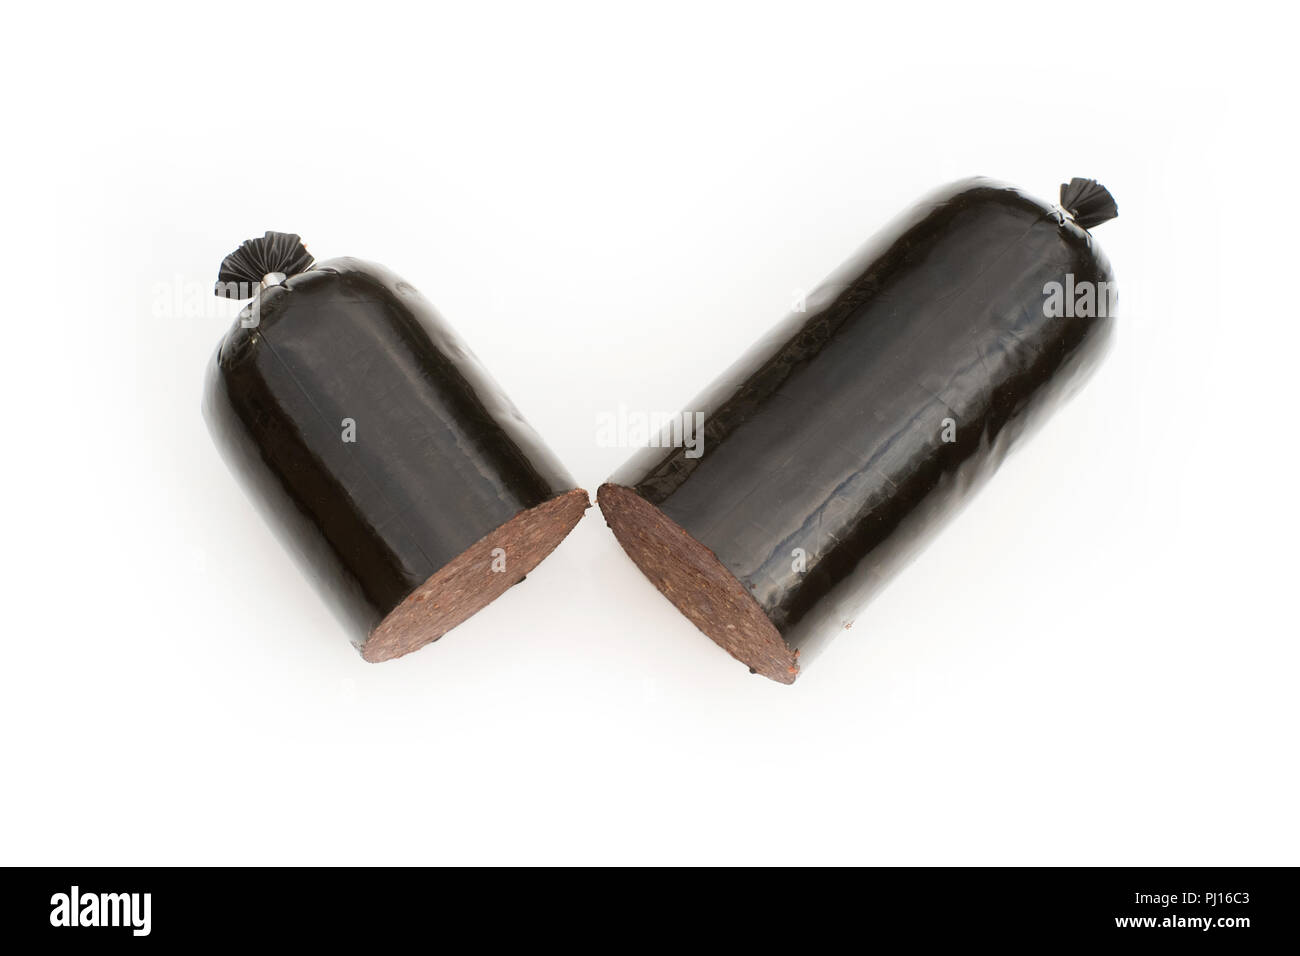 Black pudding blood sausage isolated on a white studio background. Stock Photo